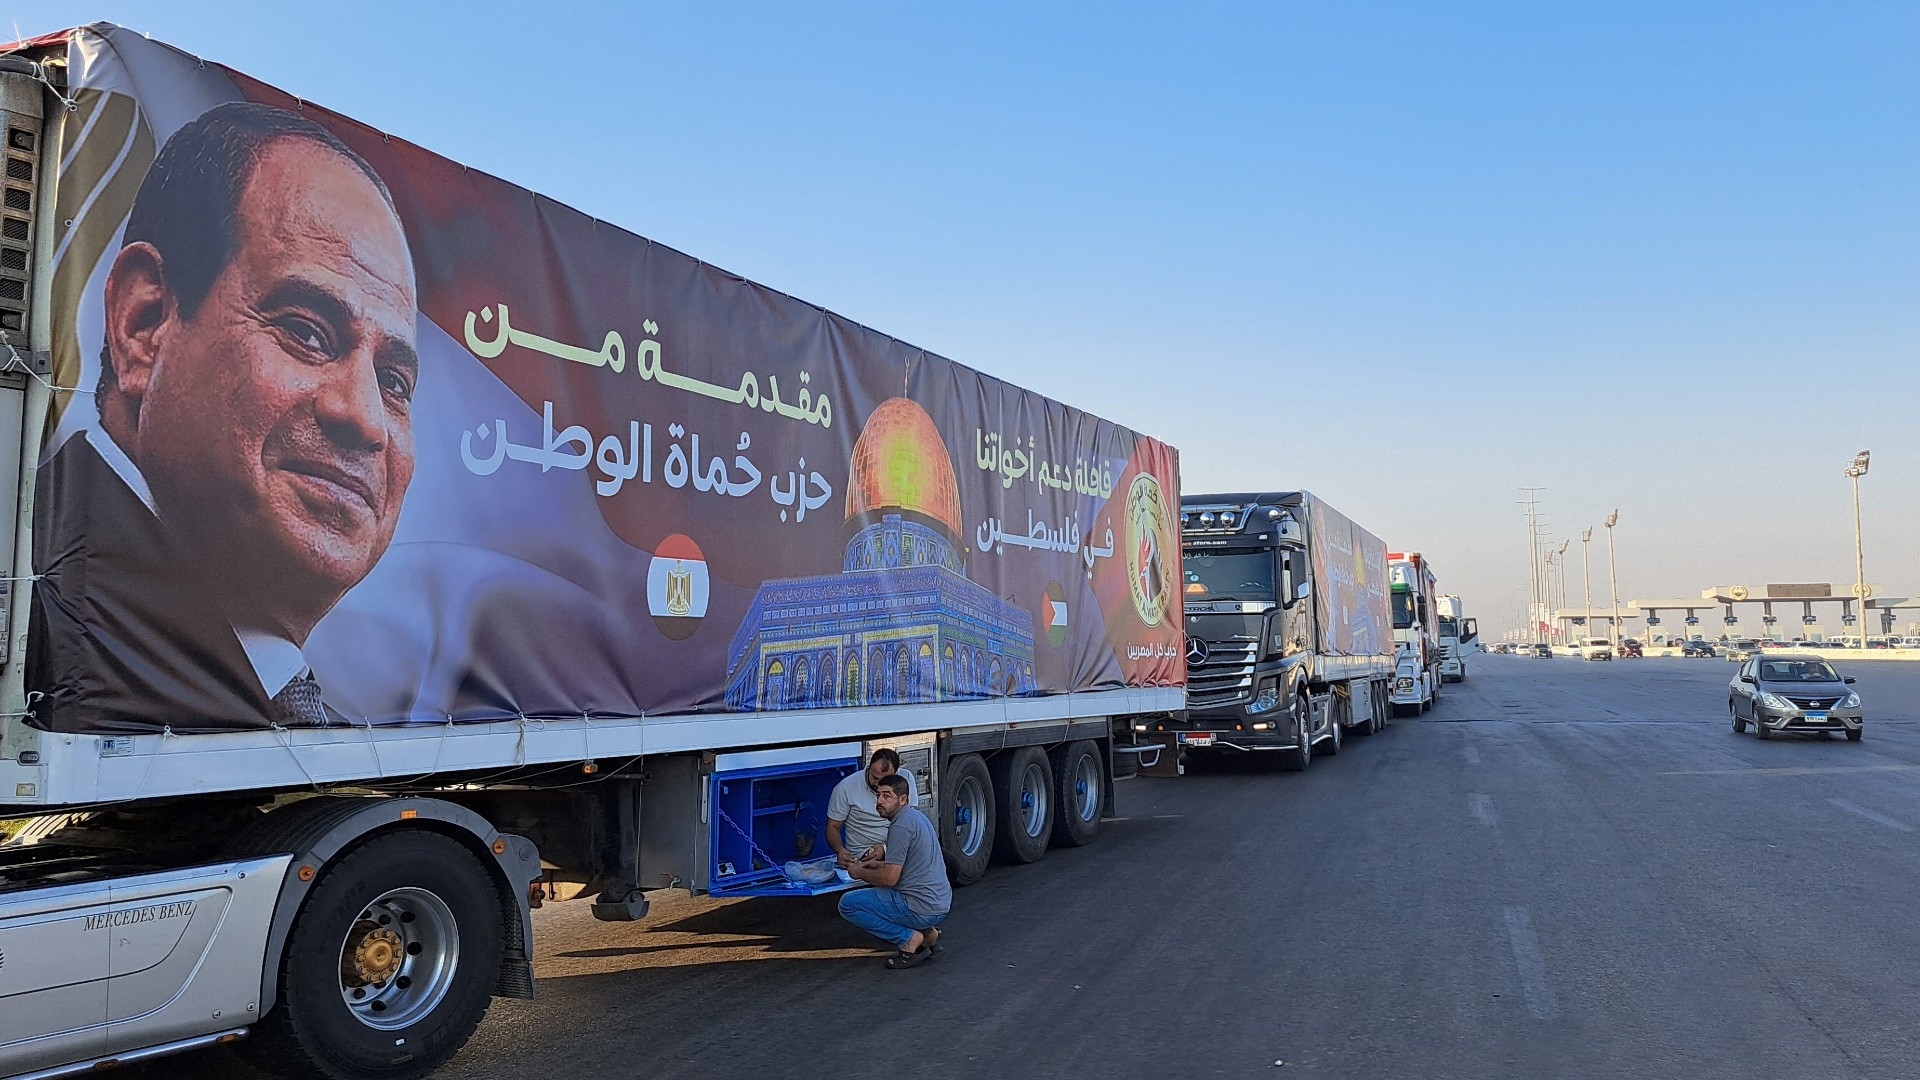 A convoy of trucks carrying aid supplies for Gaza from Egypt waits on the main Ismailia desert road on 16 October (AFP/Khaled Desouki)